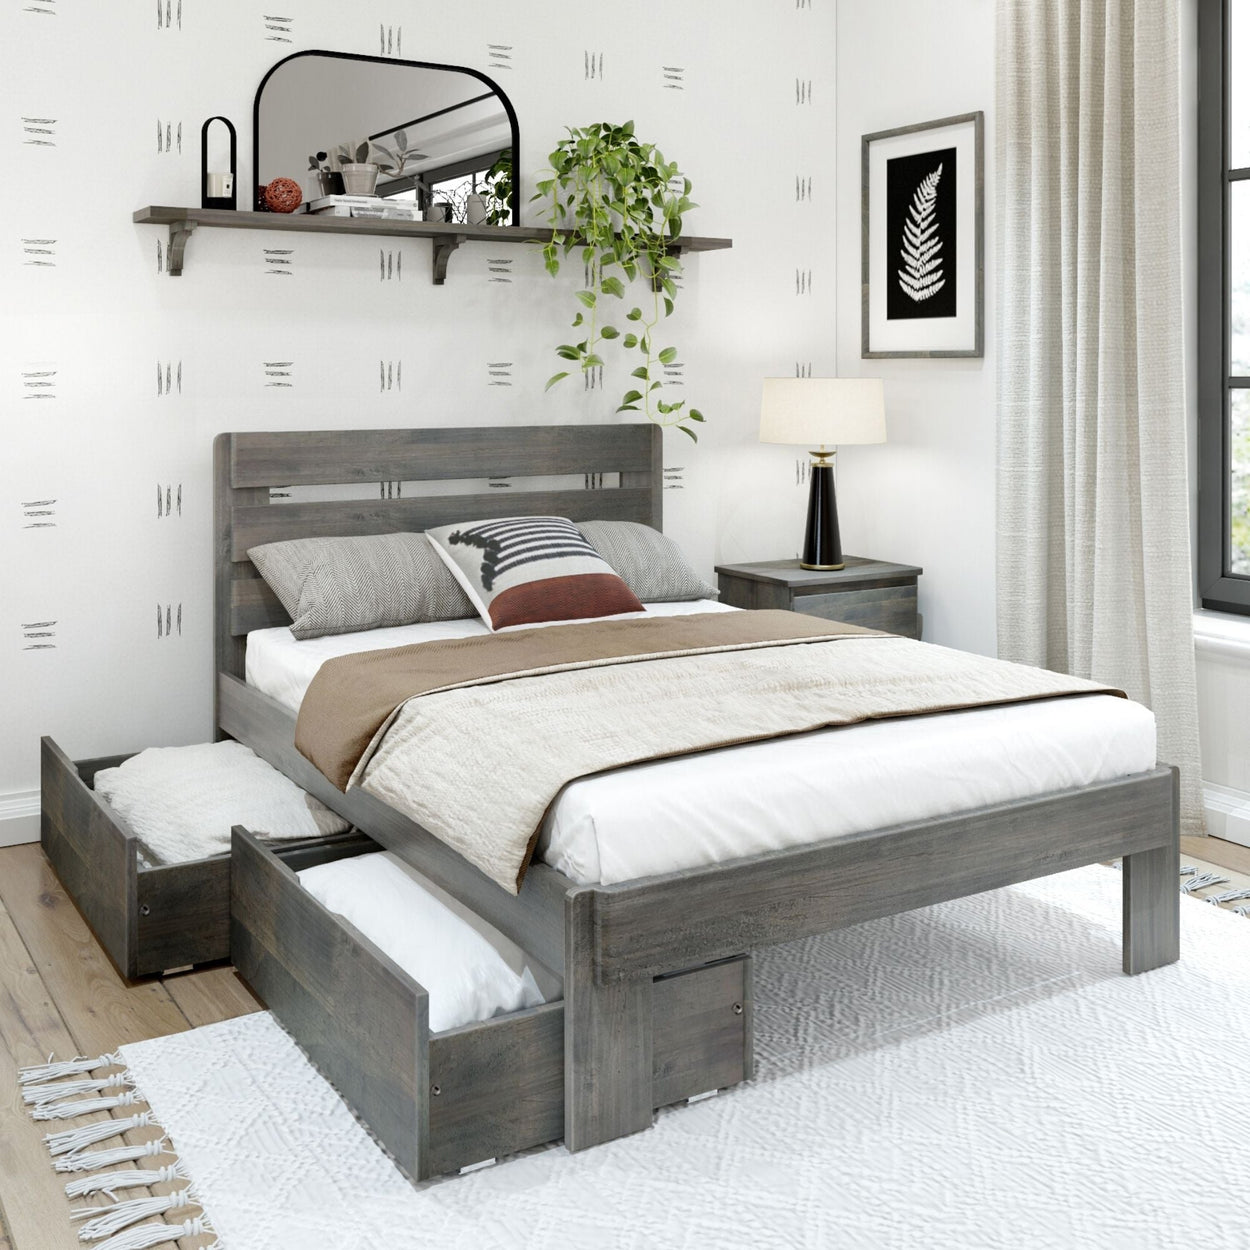 Rustic Full Bed with Slatted Headboard + Underbed Storage Single Beds Plank+Beam 